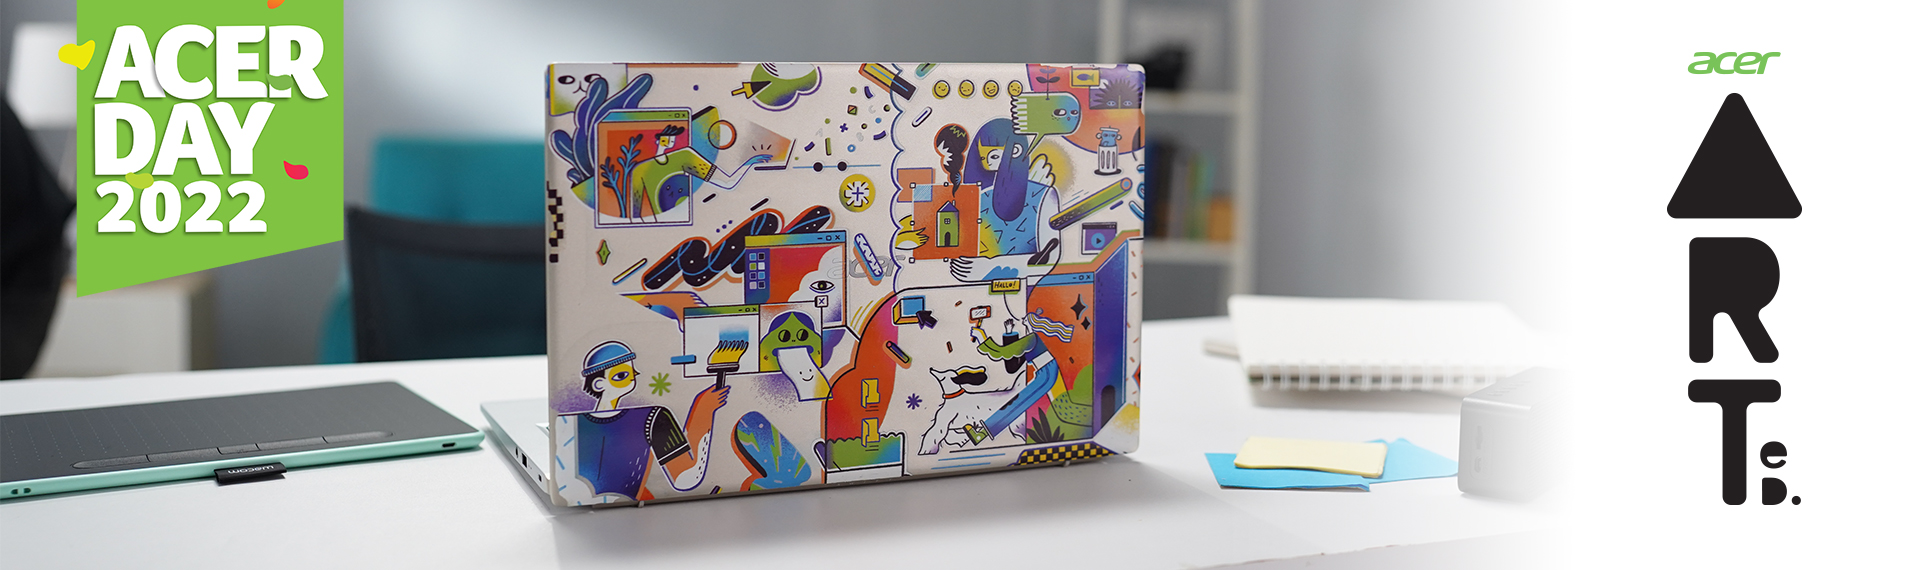 Mark Your Style with ART Exclusive Illustrated Laptop Edition